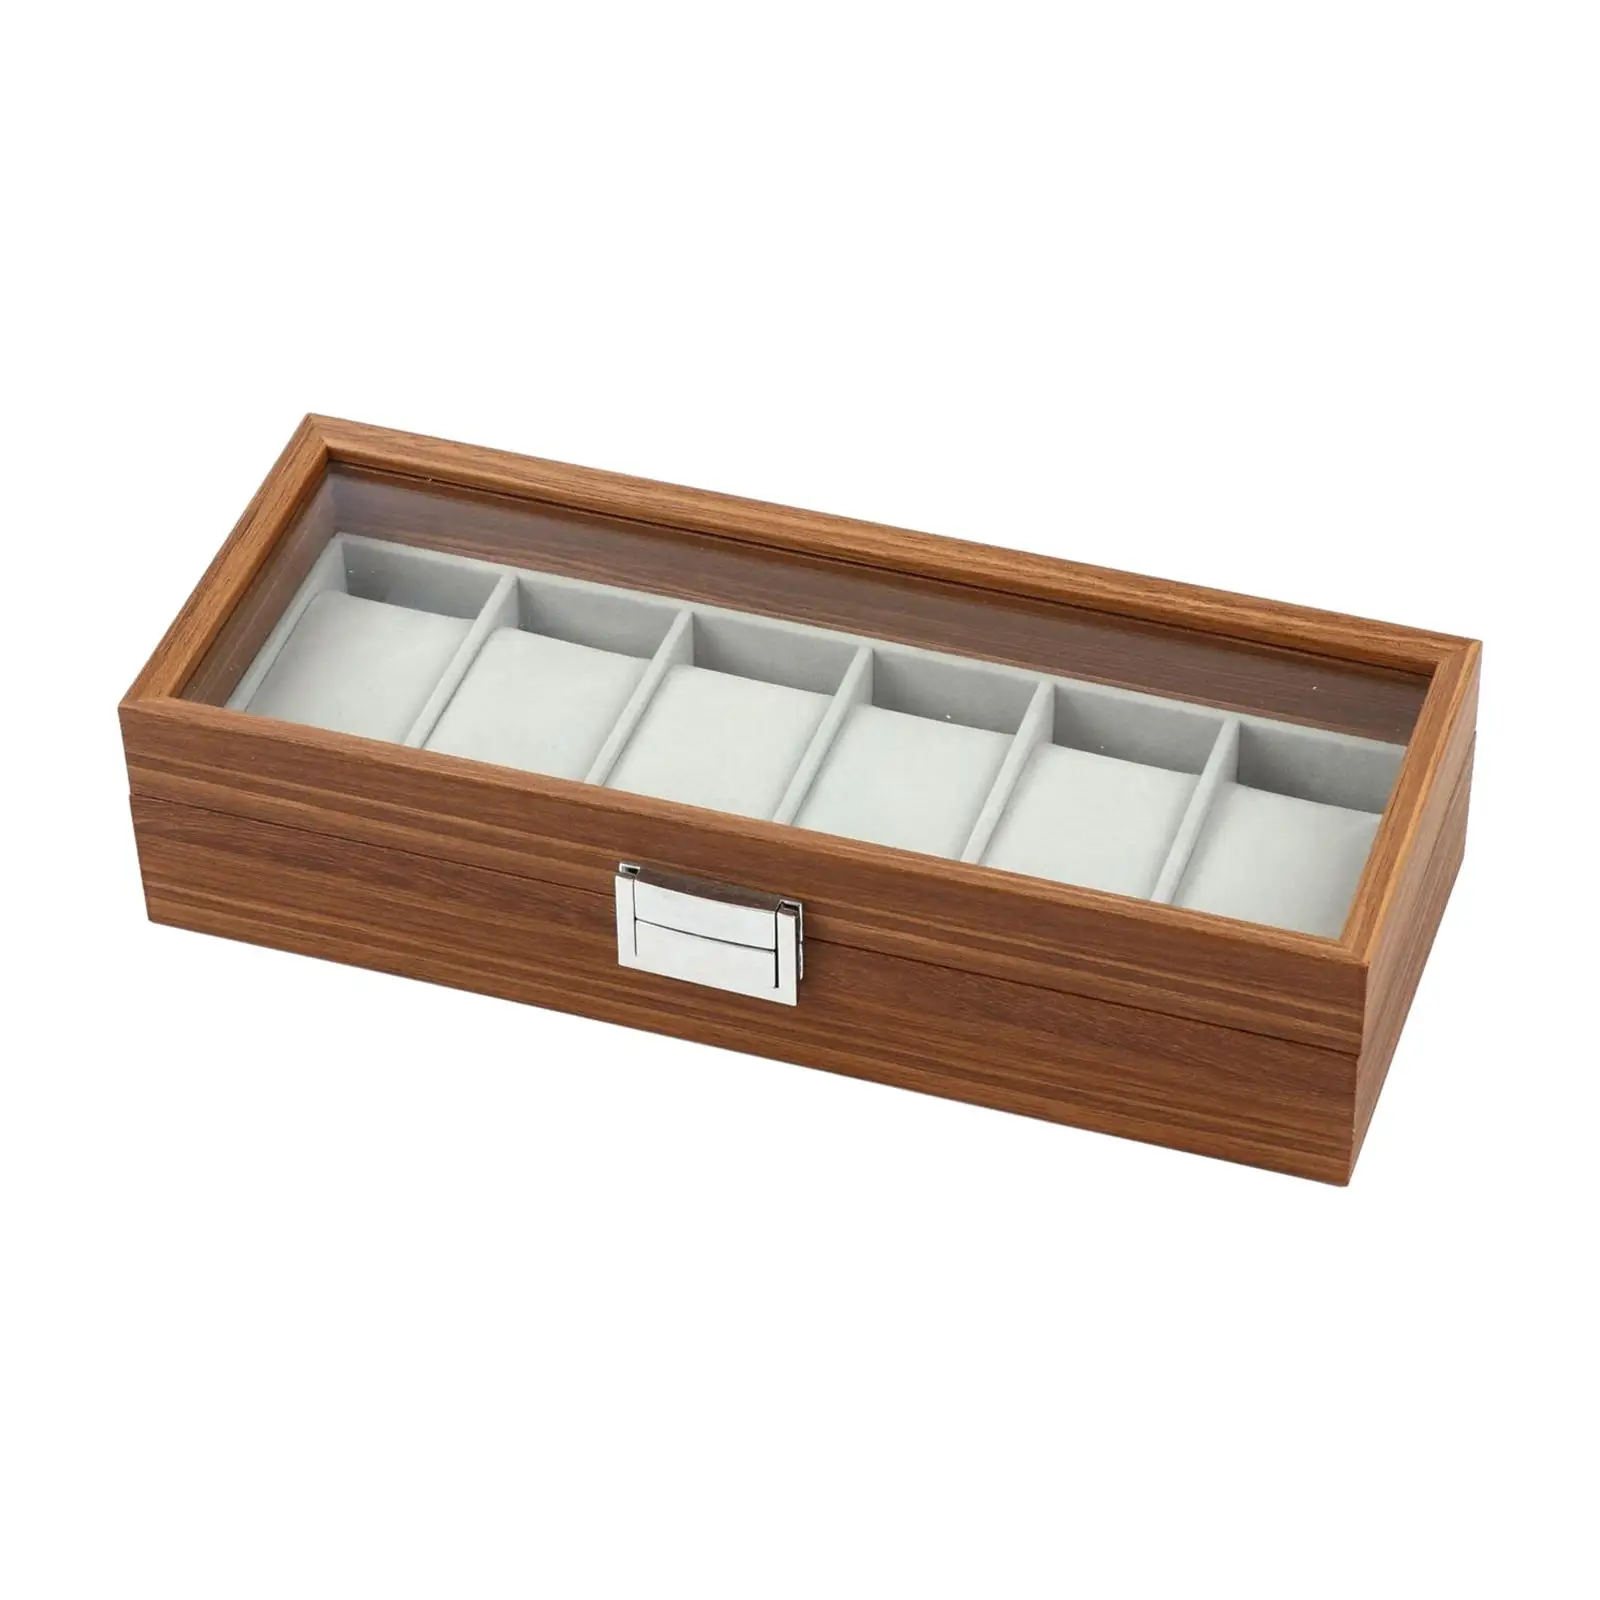 Watch Storage Box 6 Wide Slots Multifunctional Wood Watch Box for Men Women Watches Necklace Bracelet Earrings Home Decoration